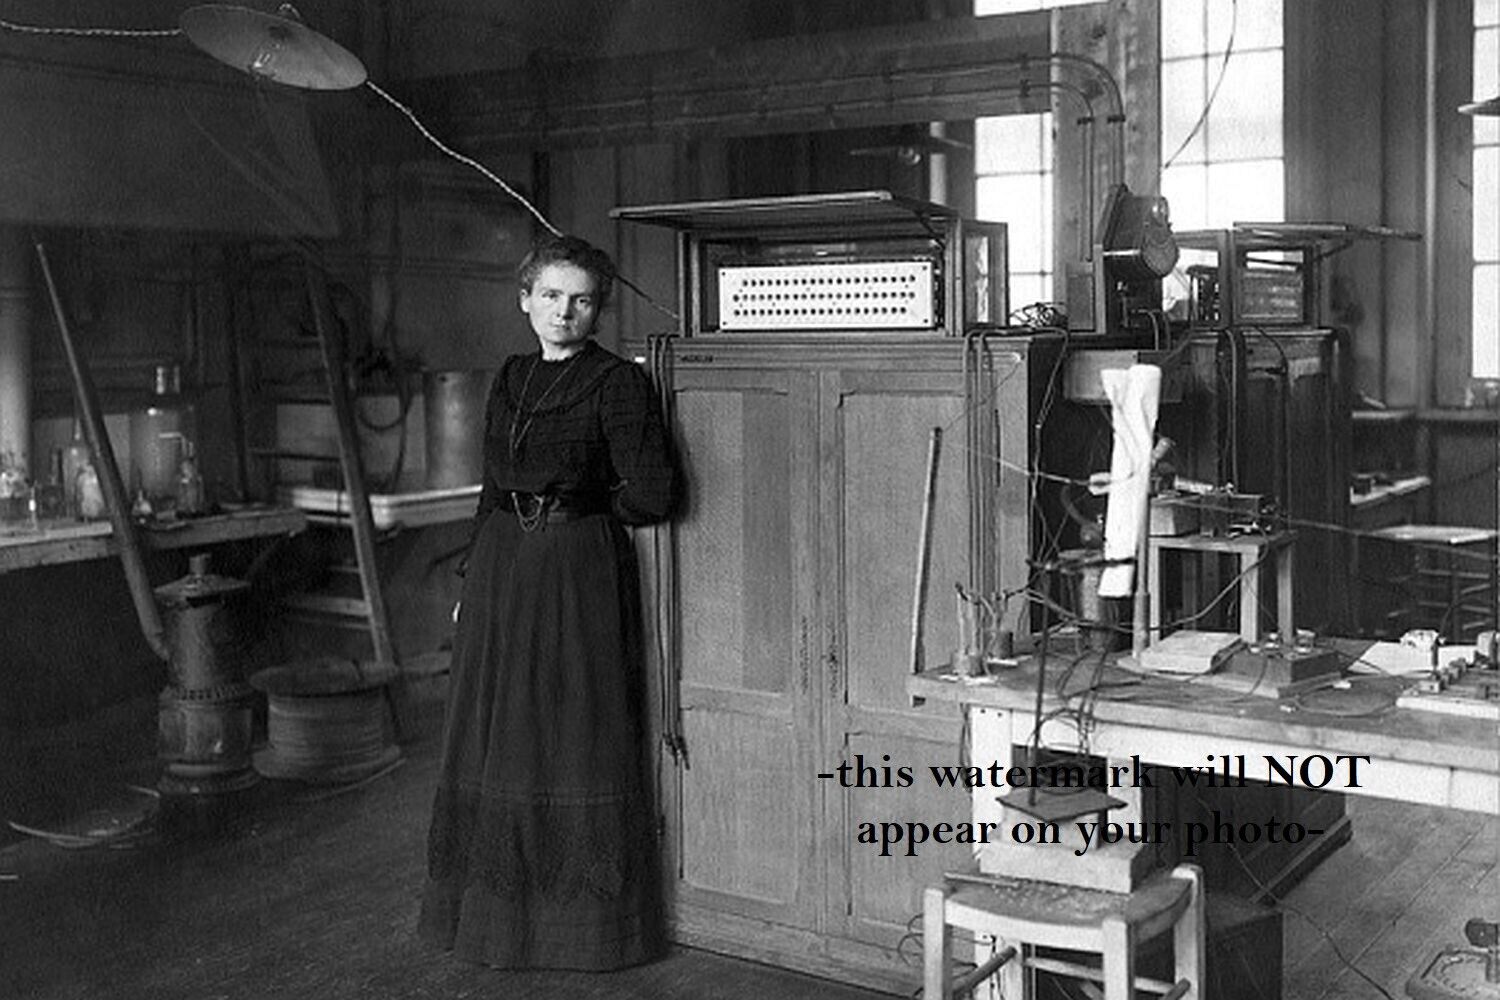 Marie Curie PHOTO In Laboratory 1912, Physicist Scientist 1st Woman Nobel Prize